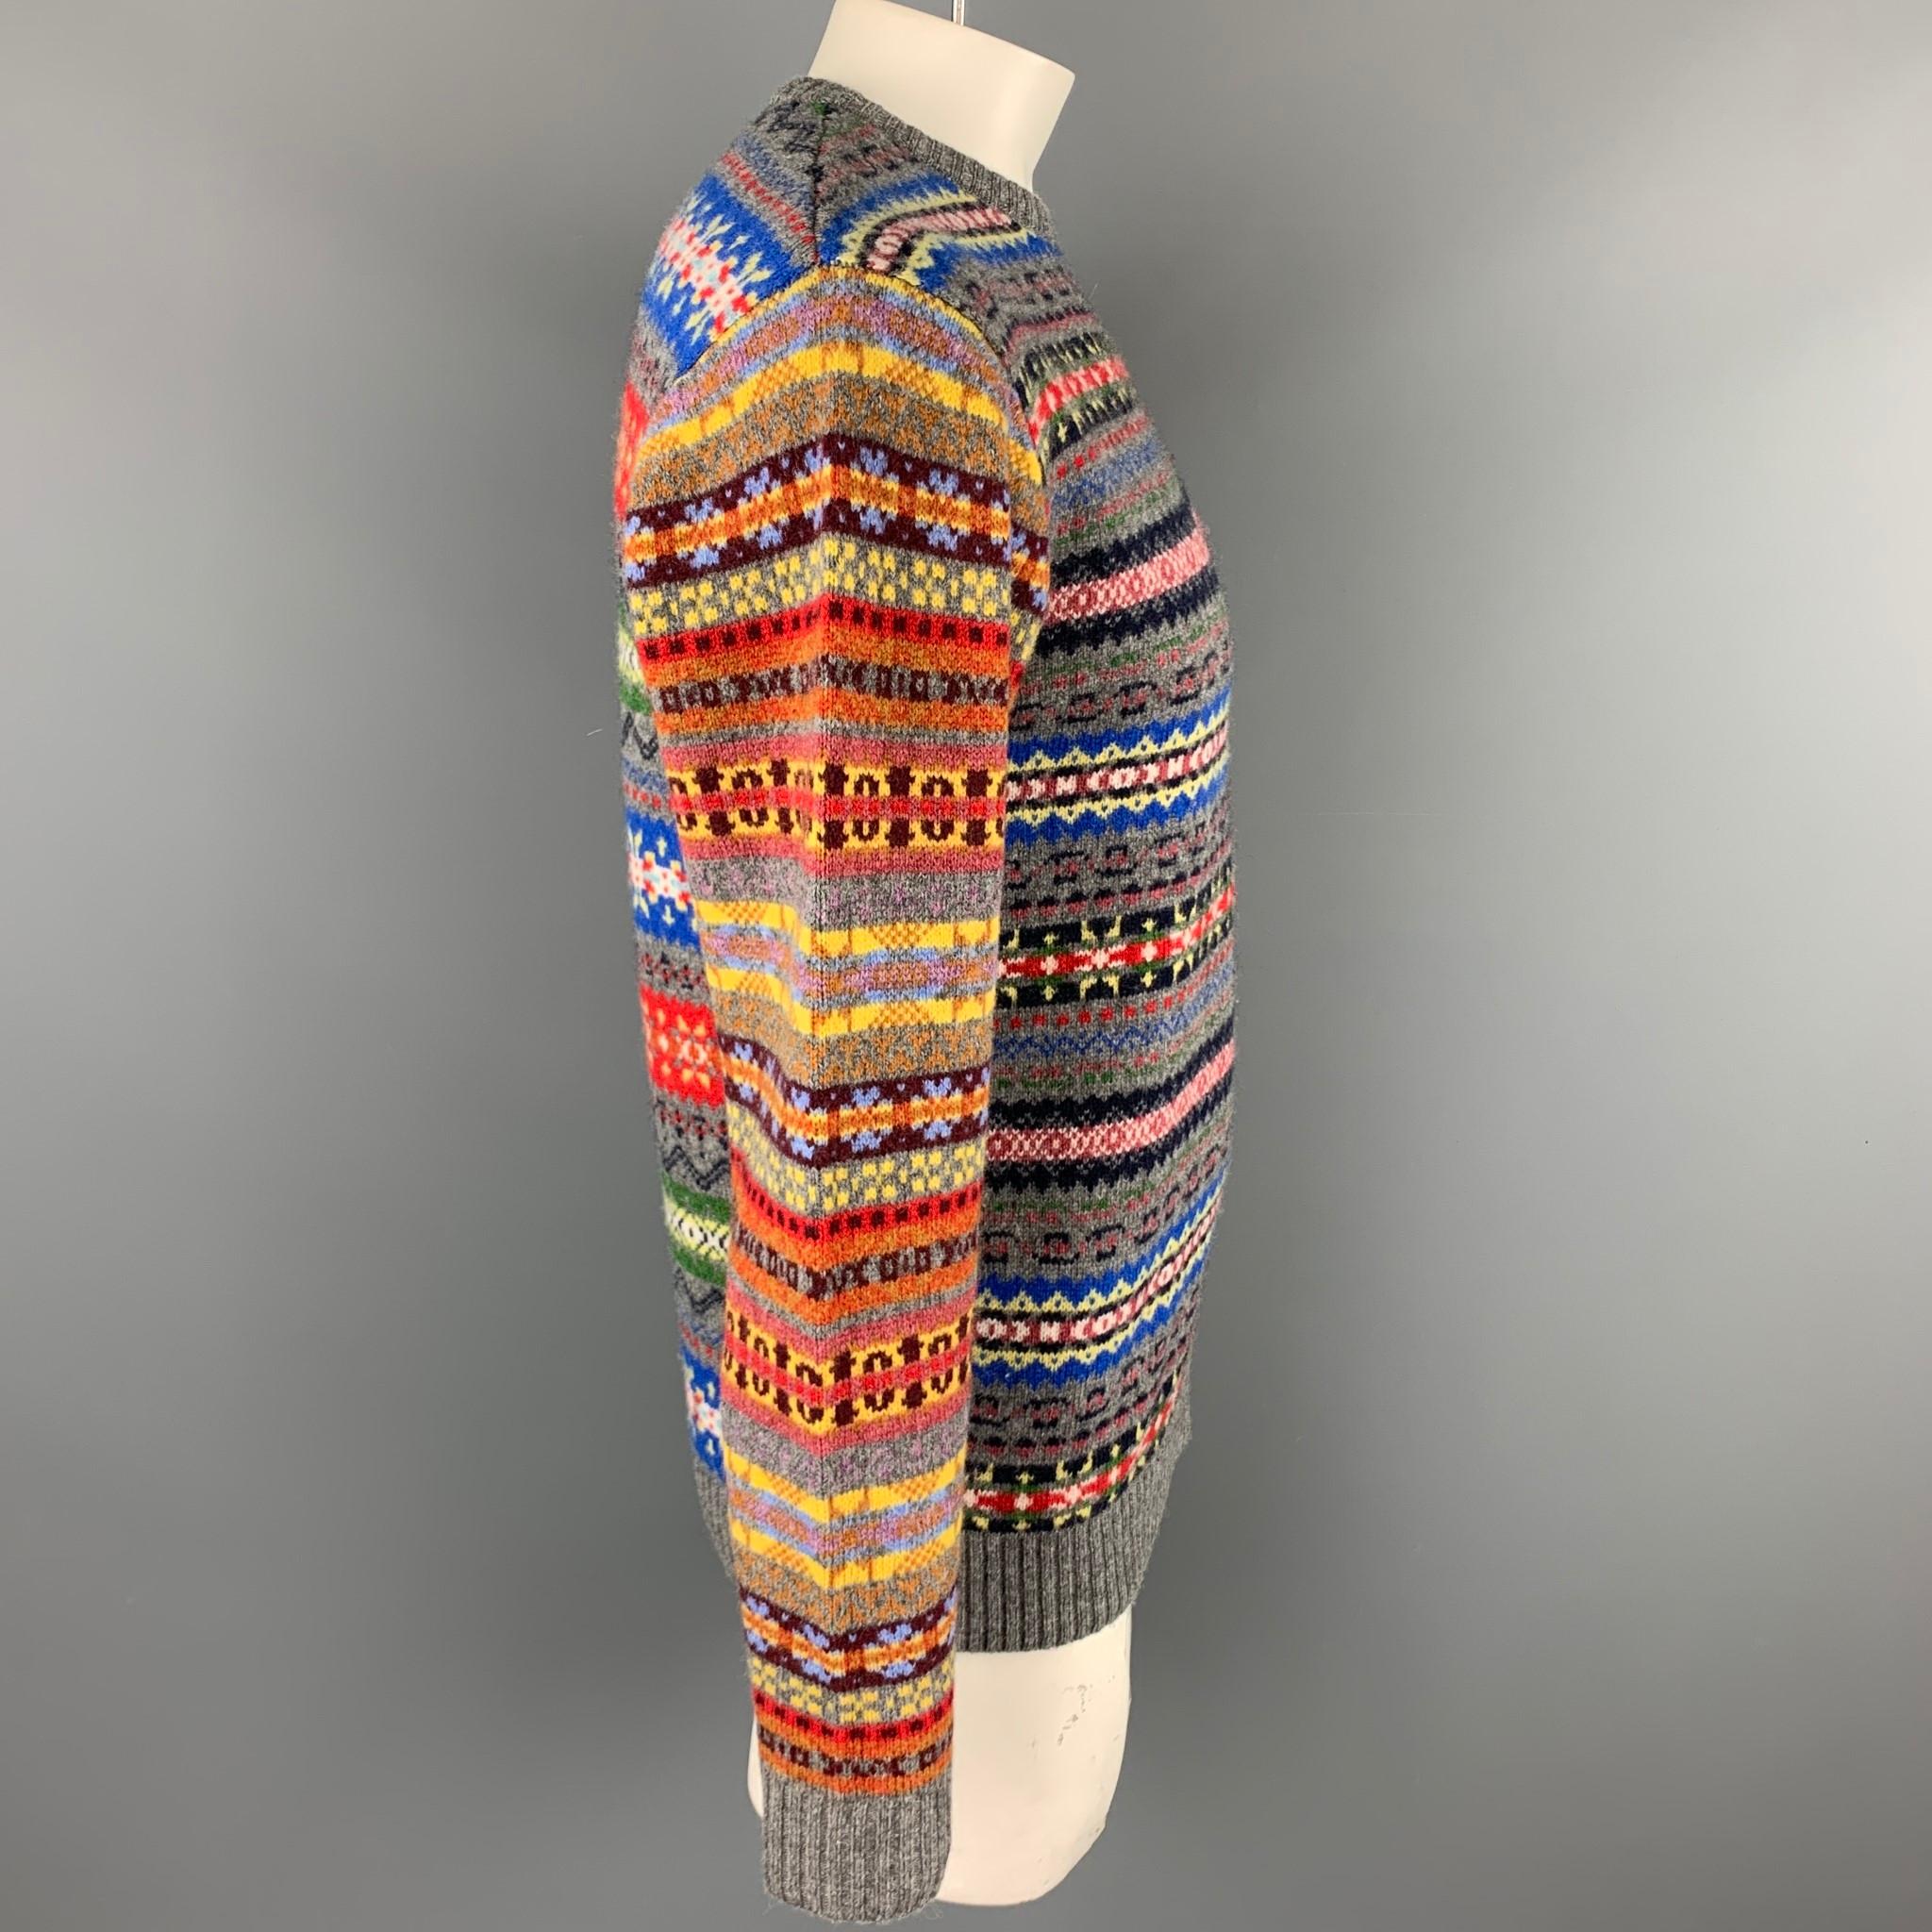 BEAMS PLUS sweater comes in a multi-color fairisle wool / nylon featuring a crew-neck.

Very Good Pre-Owned Condition.
Marked: L

Measurements:

Shoulder: 20 in. 
Chest: 44 in. 
Sleeve: 26.5 in. 
Length: 27.5 in. 
 
